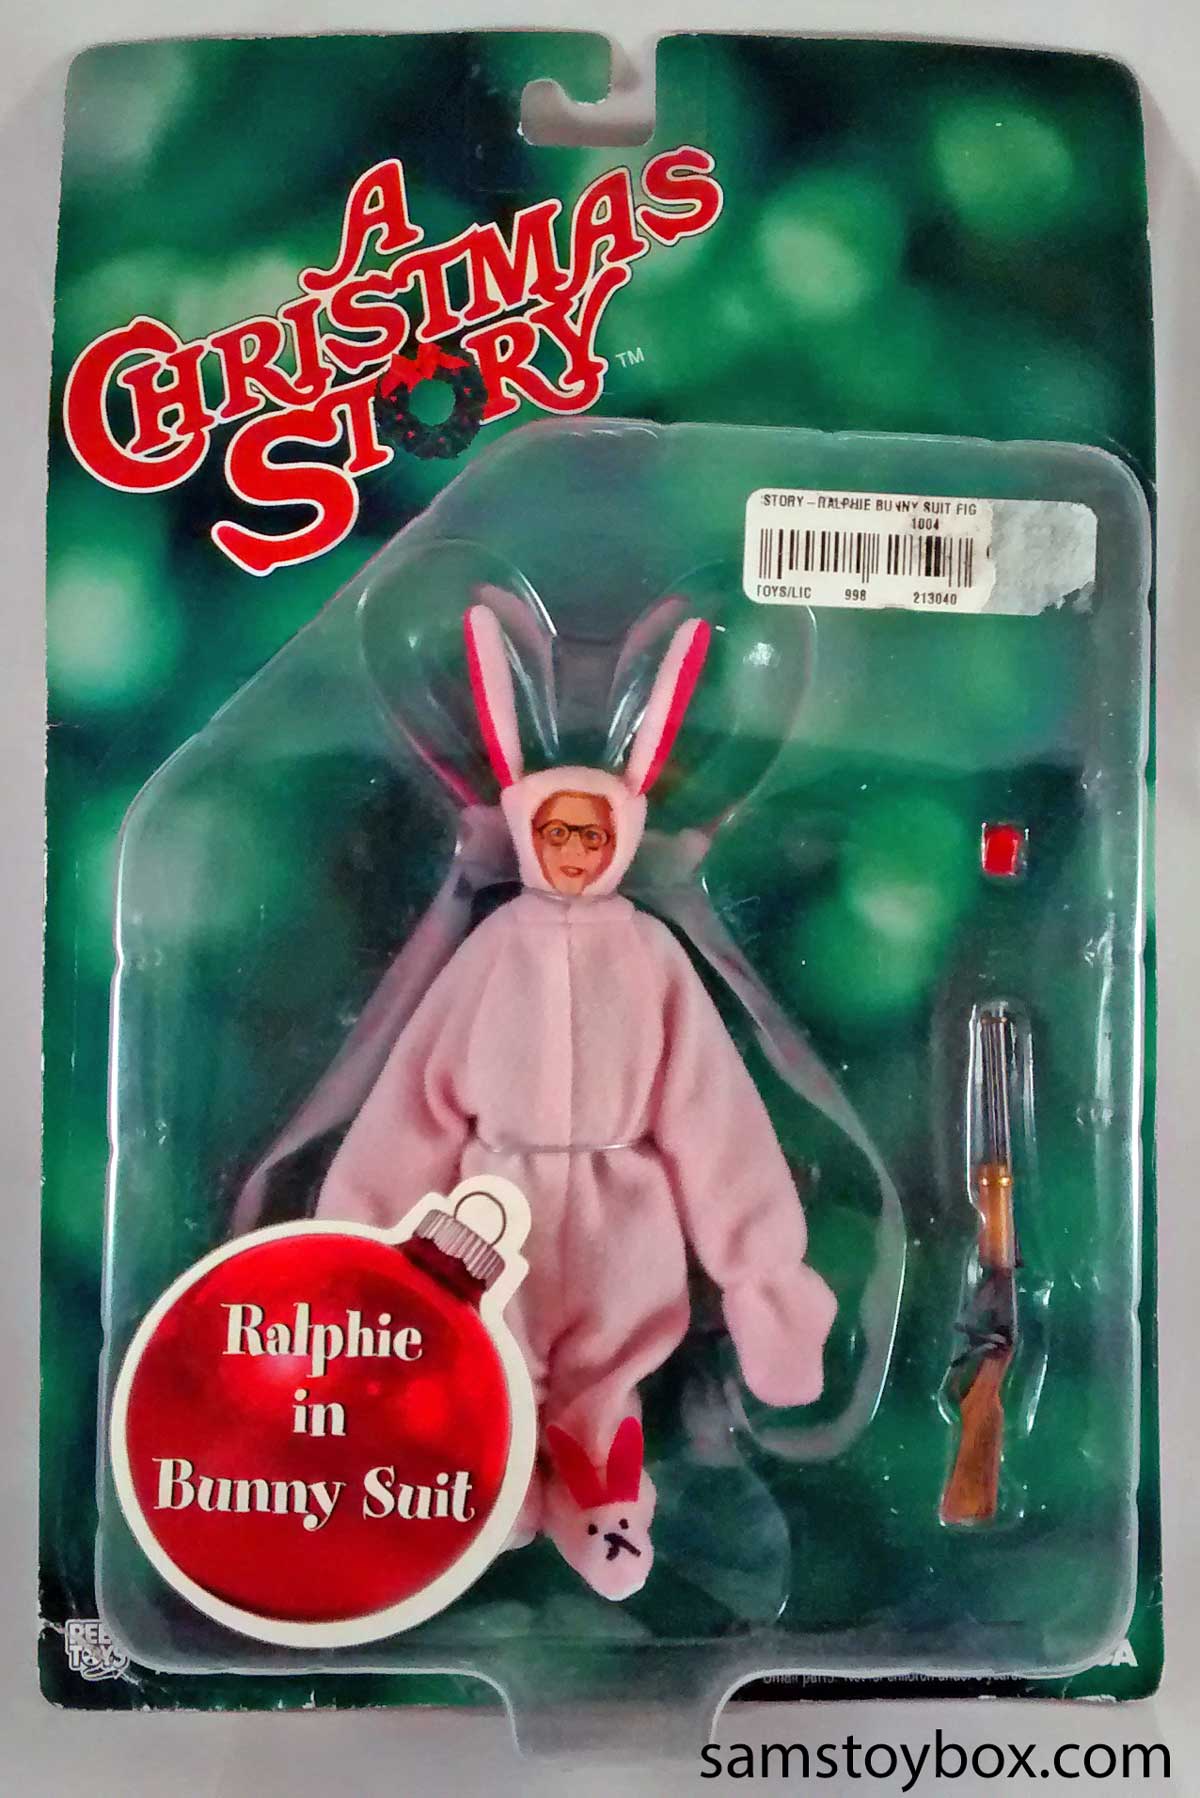 Ralphie in Bunny Suit Action Figure from A Christmas Story